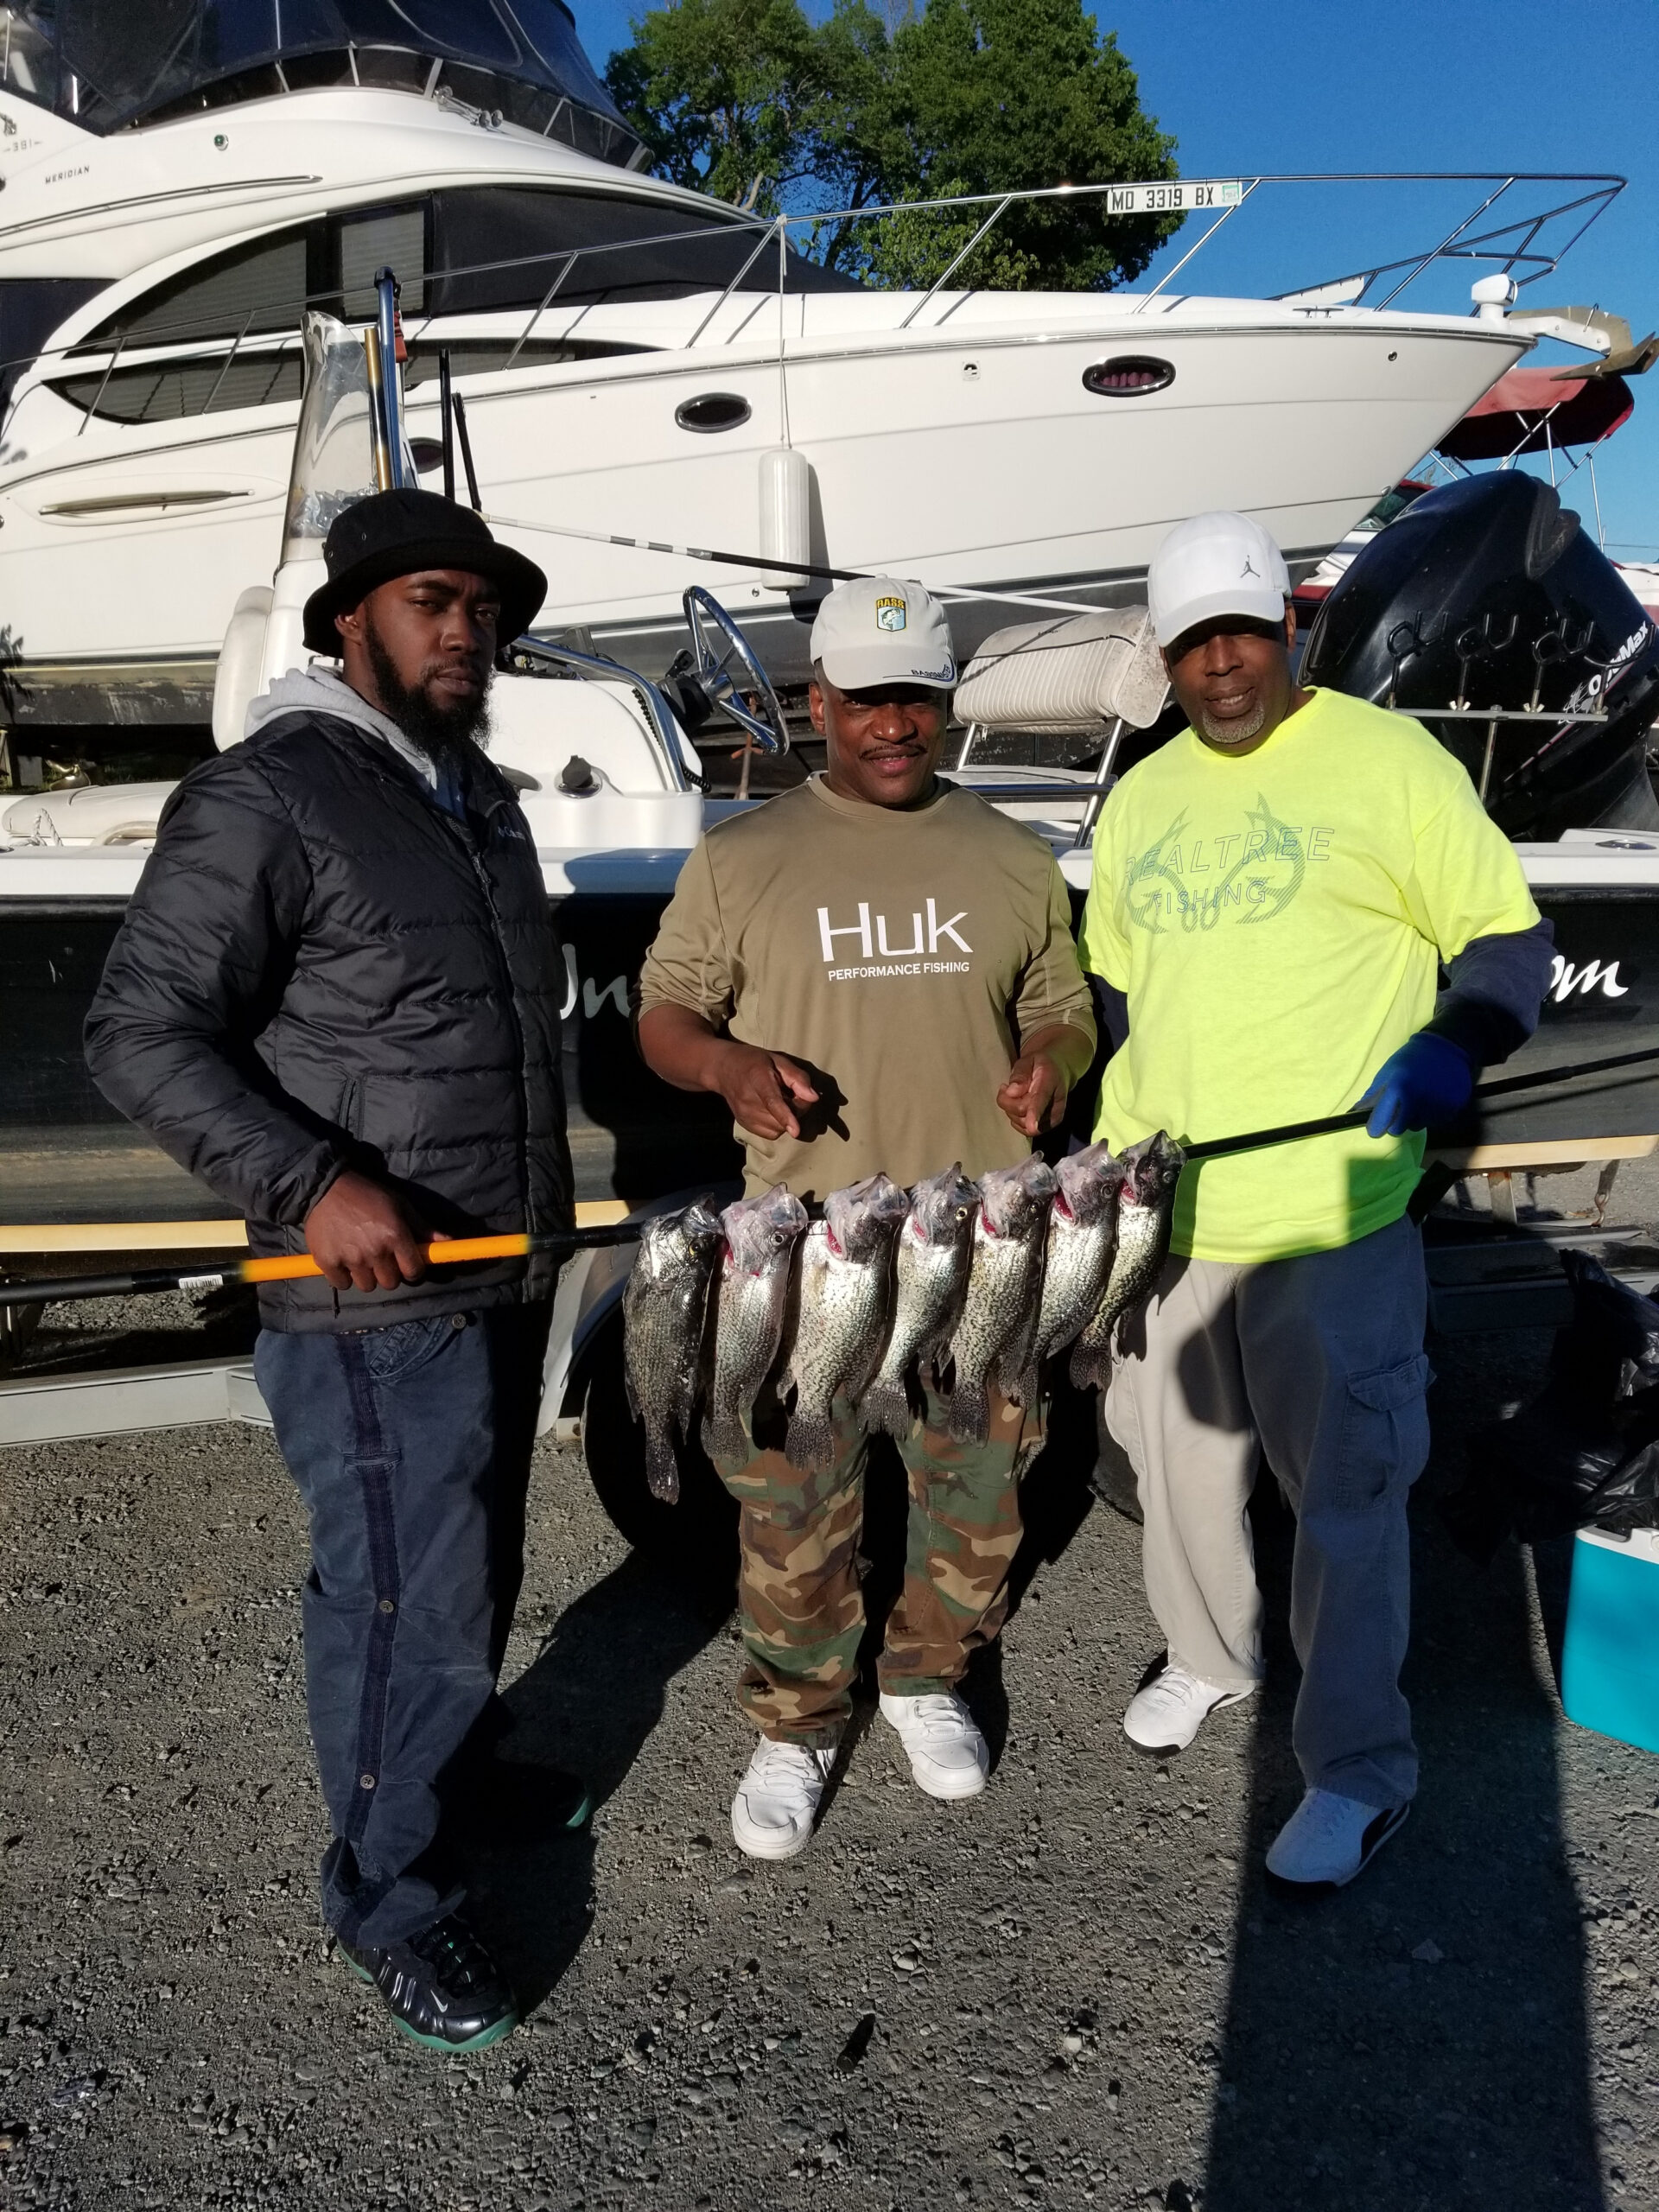 https://indianheadcharters.com/wp-content/uploads/2021/05/5-1-21-scaled.jpg